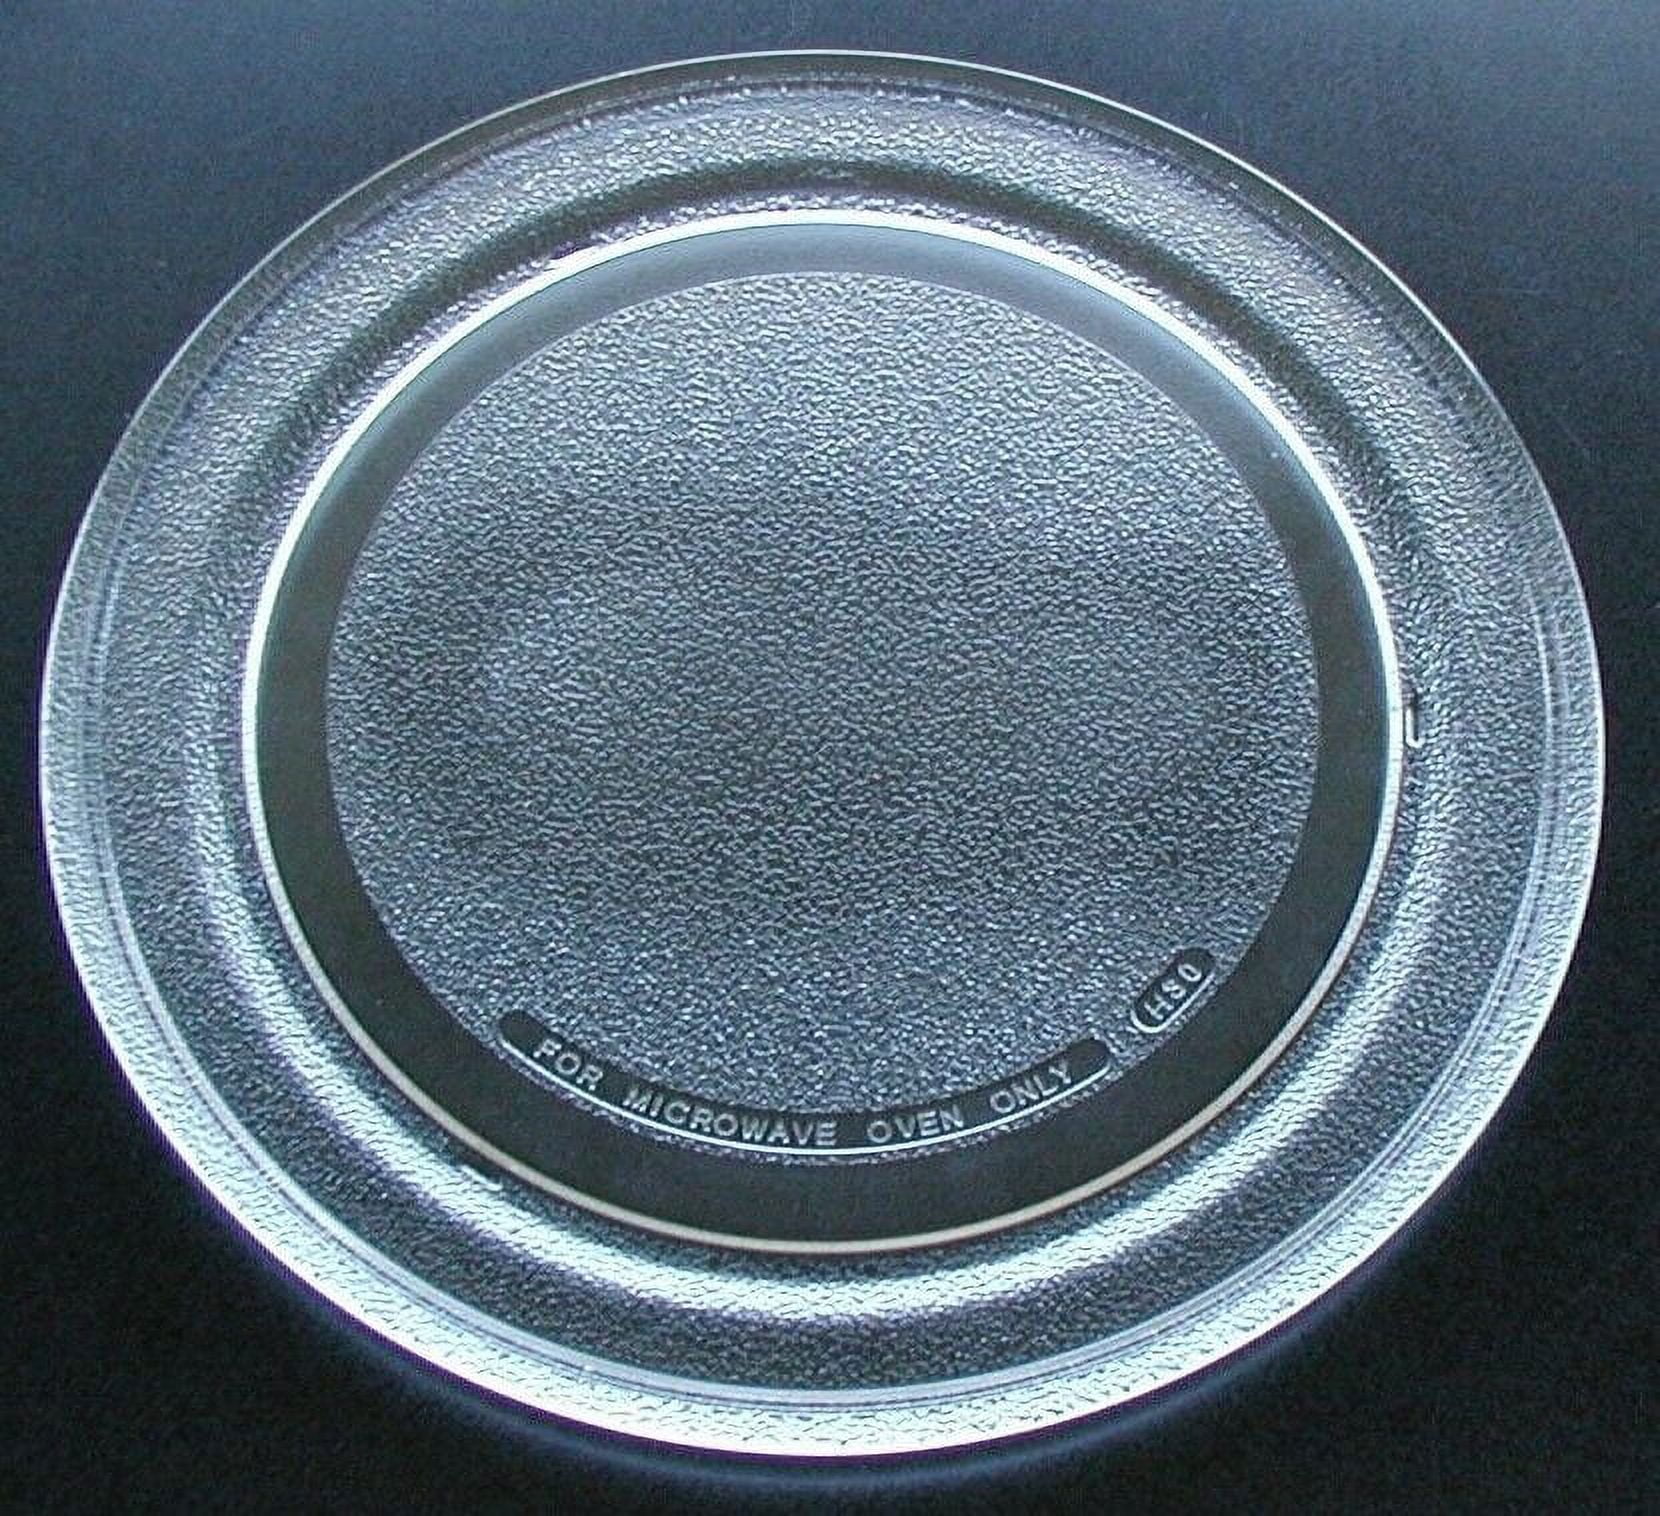 Impresa 12.75 Microwave Glass Plate/Microwave Glass Turntable Plate  Replacement